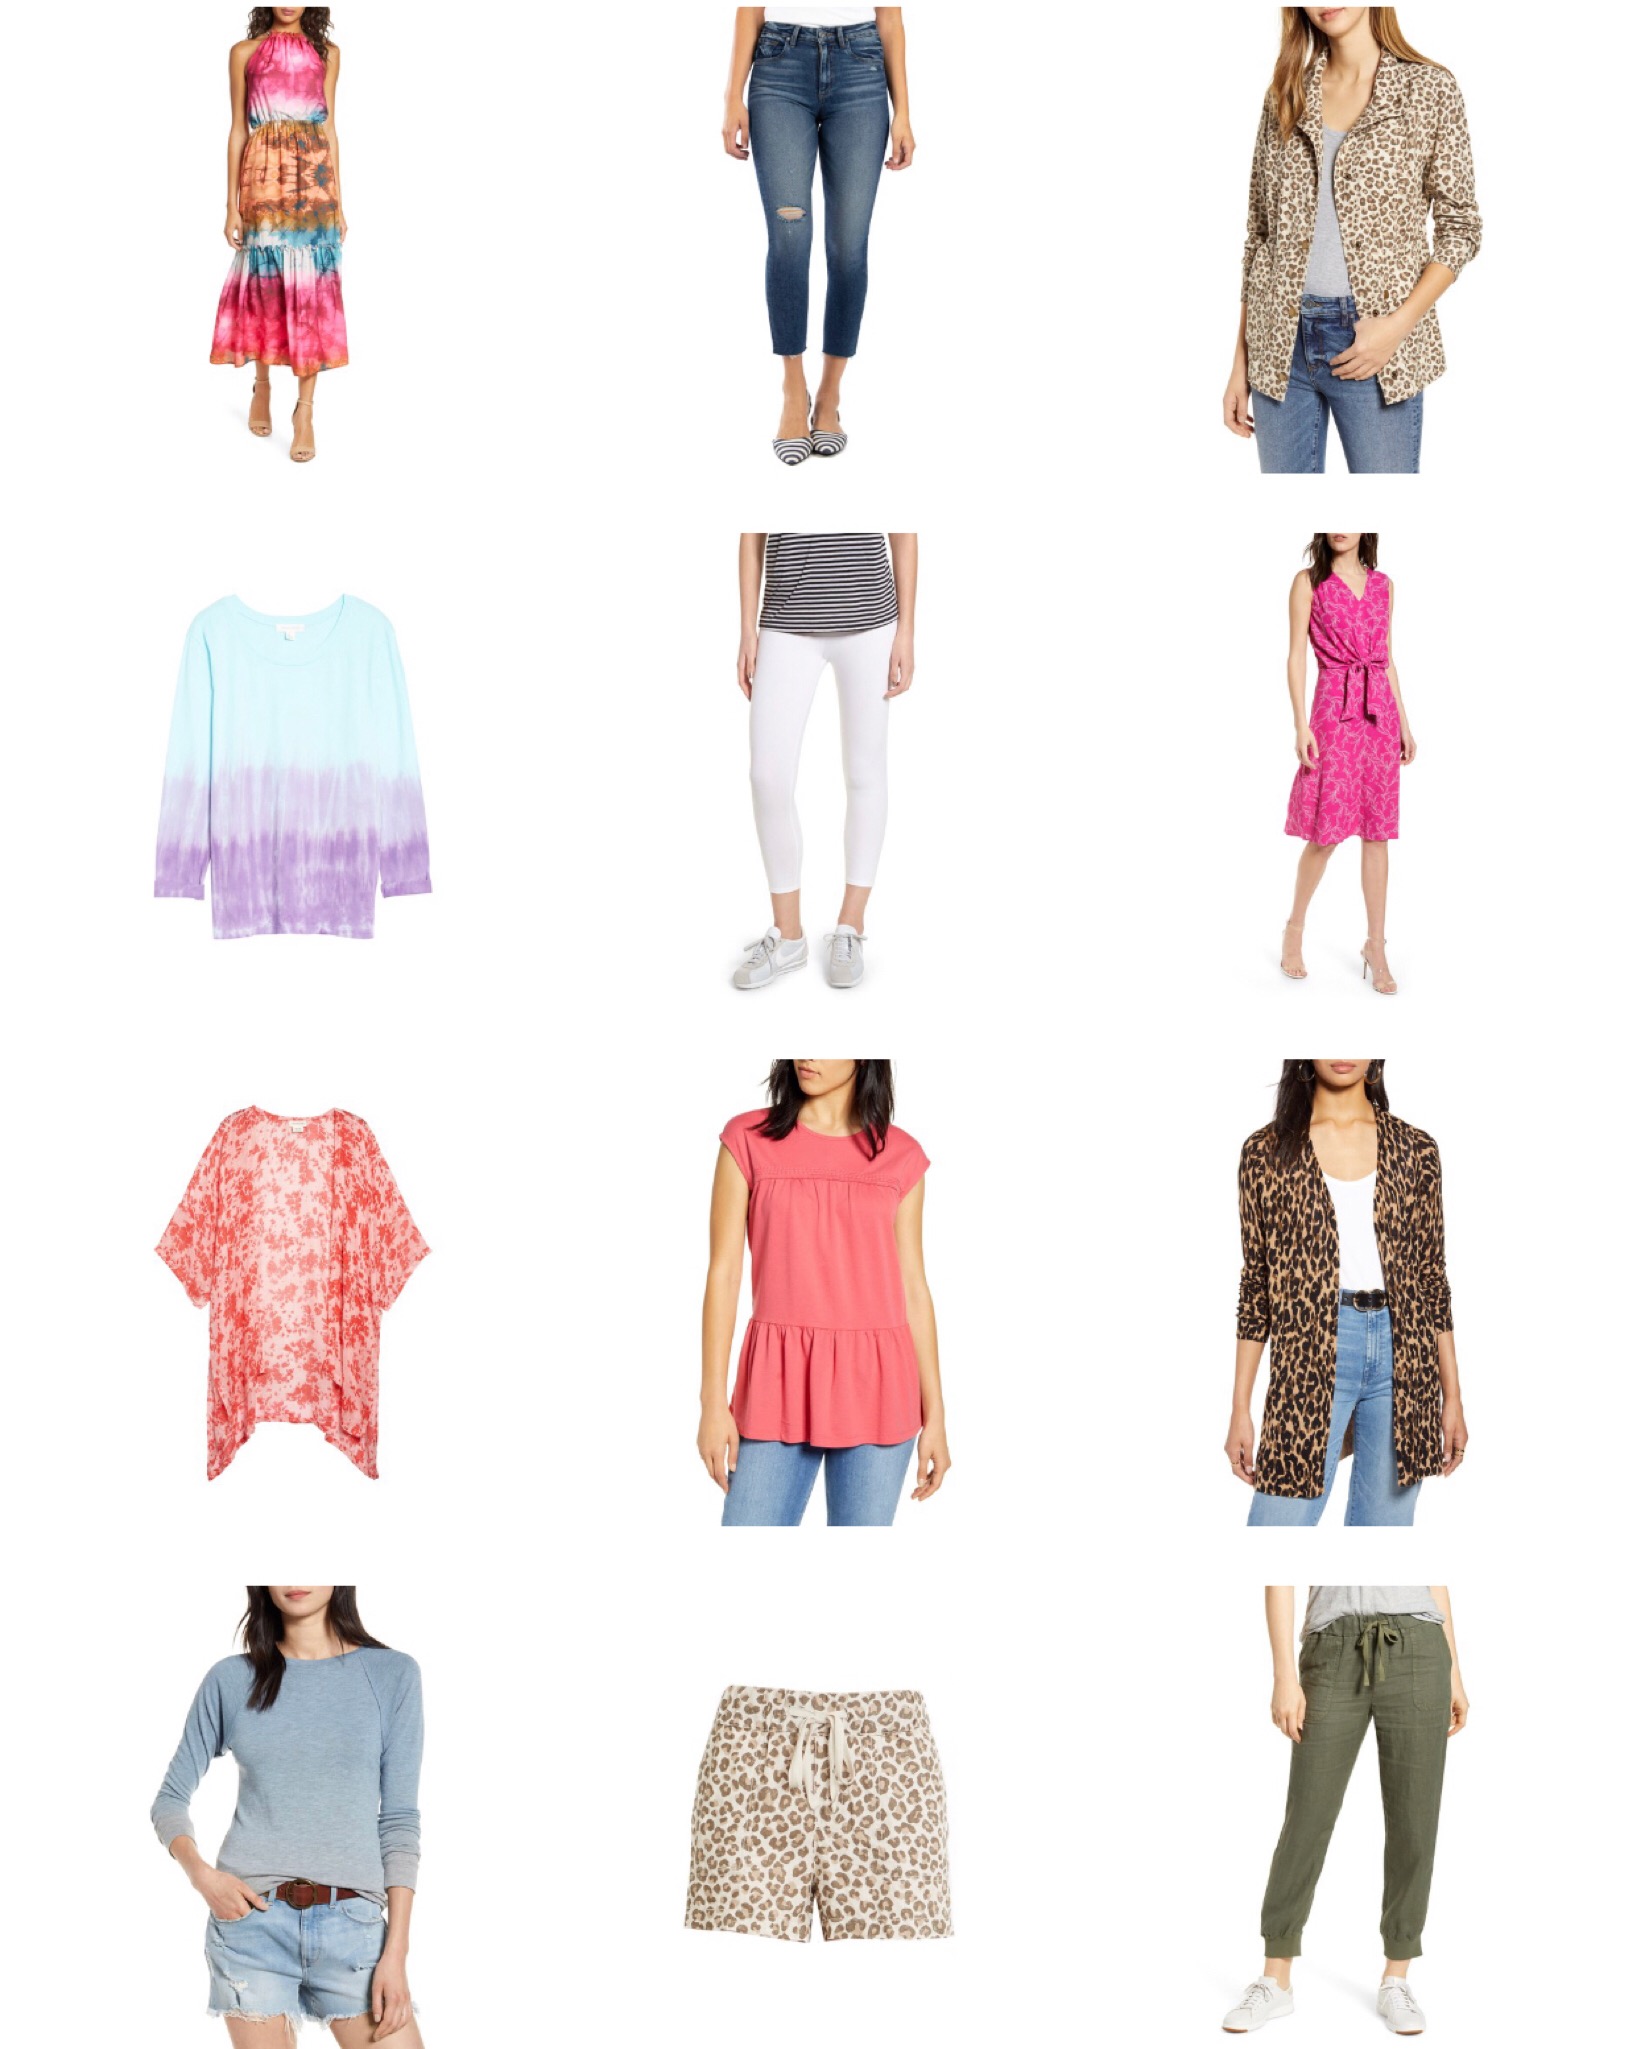 Nordstrom Up To 70% Off Sale!! - The Double Take Girls